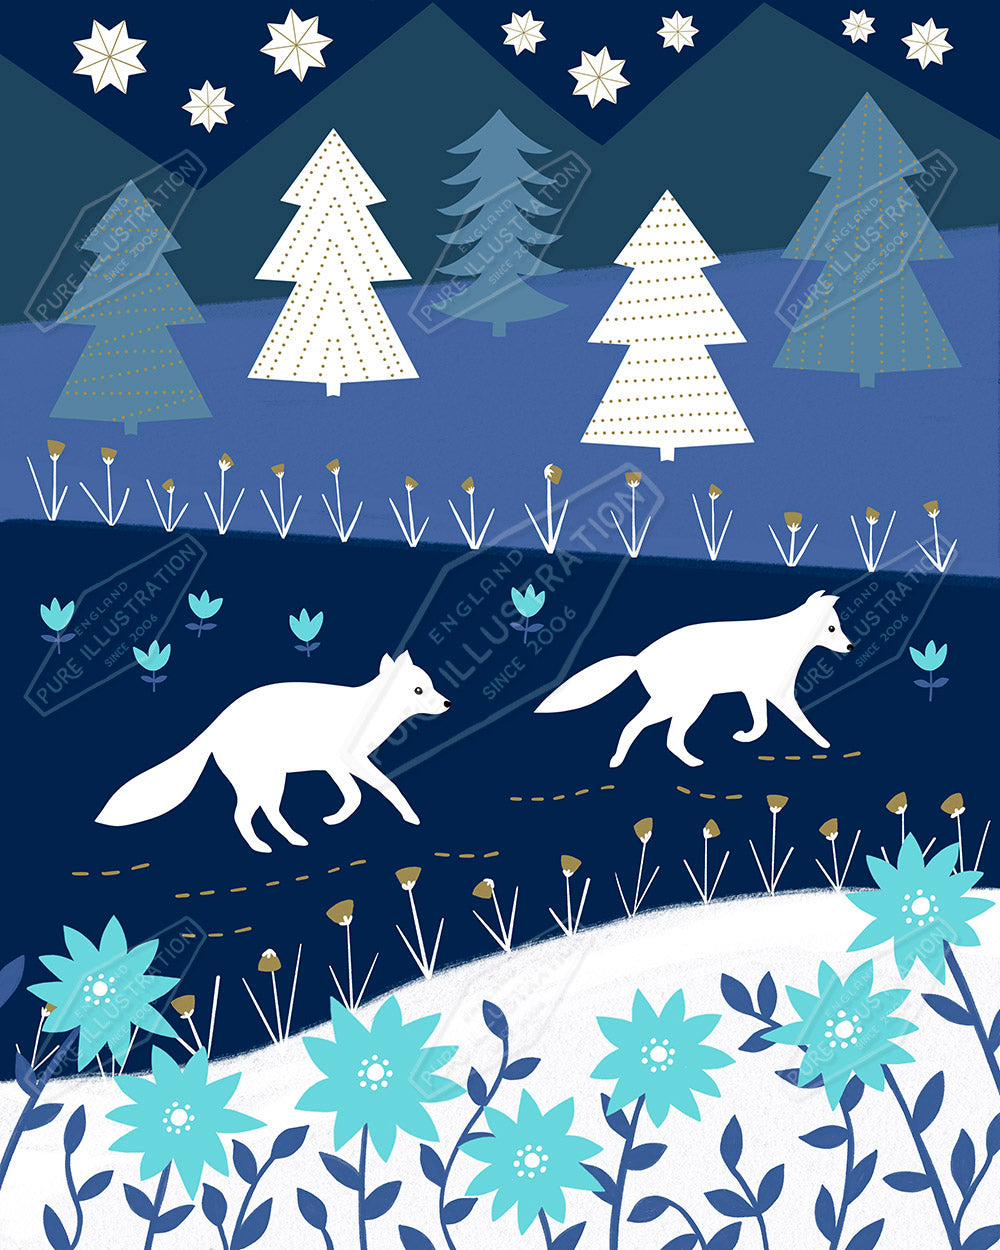 Country Foxes Christmas Illustration by Sian Summerhayes for Pure Art Licensing & Surface Design Agency